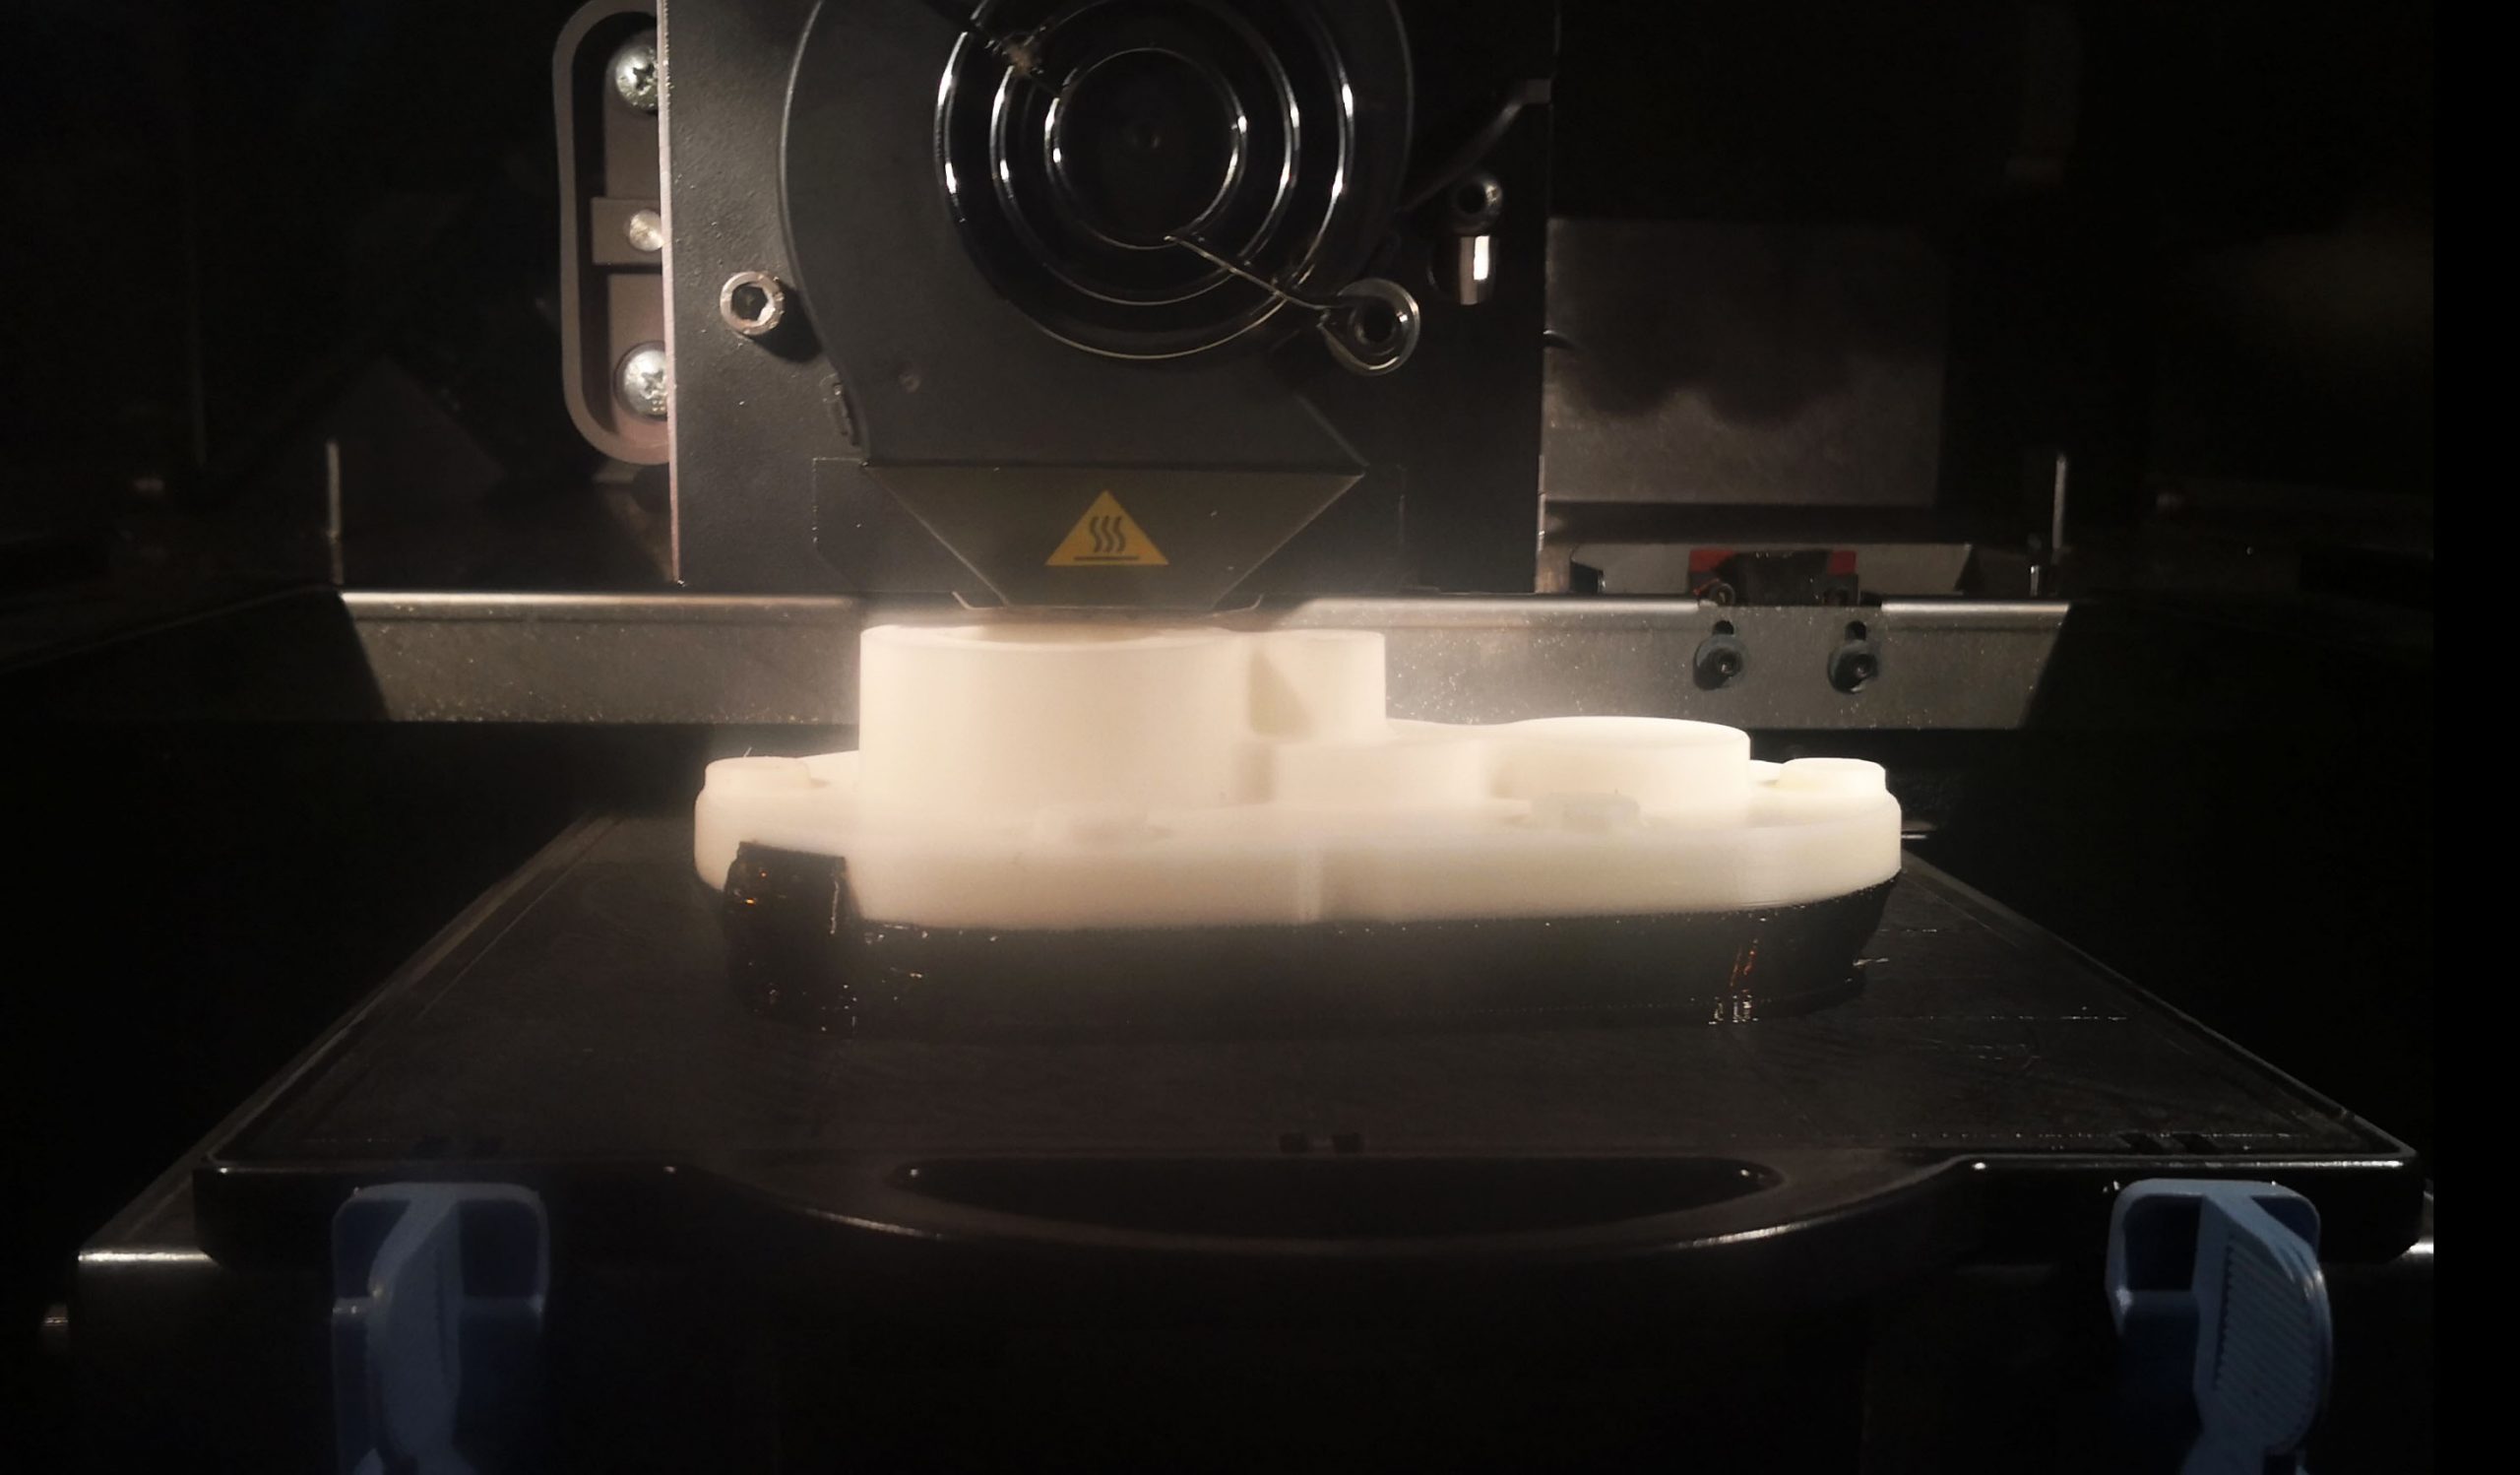 PROTOTYPING-RAPID 3d printing ca and cam